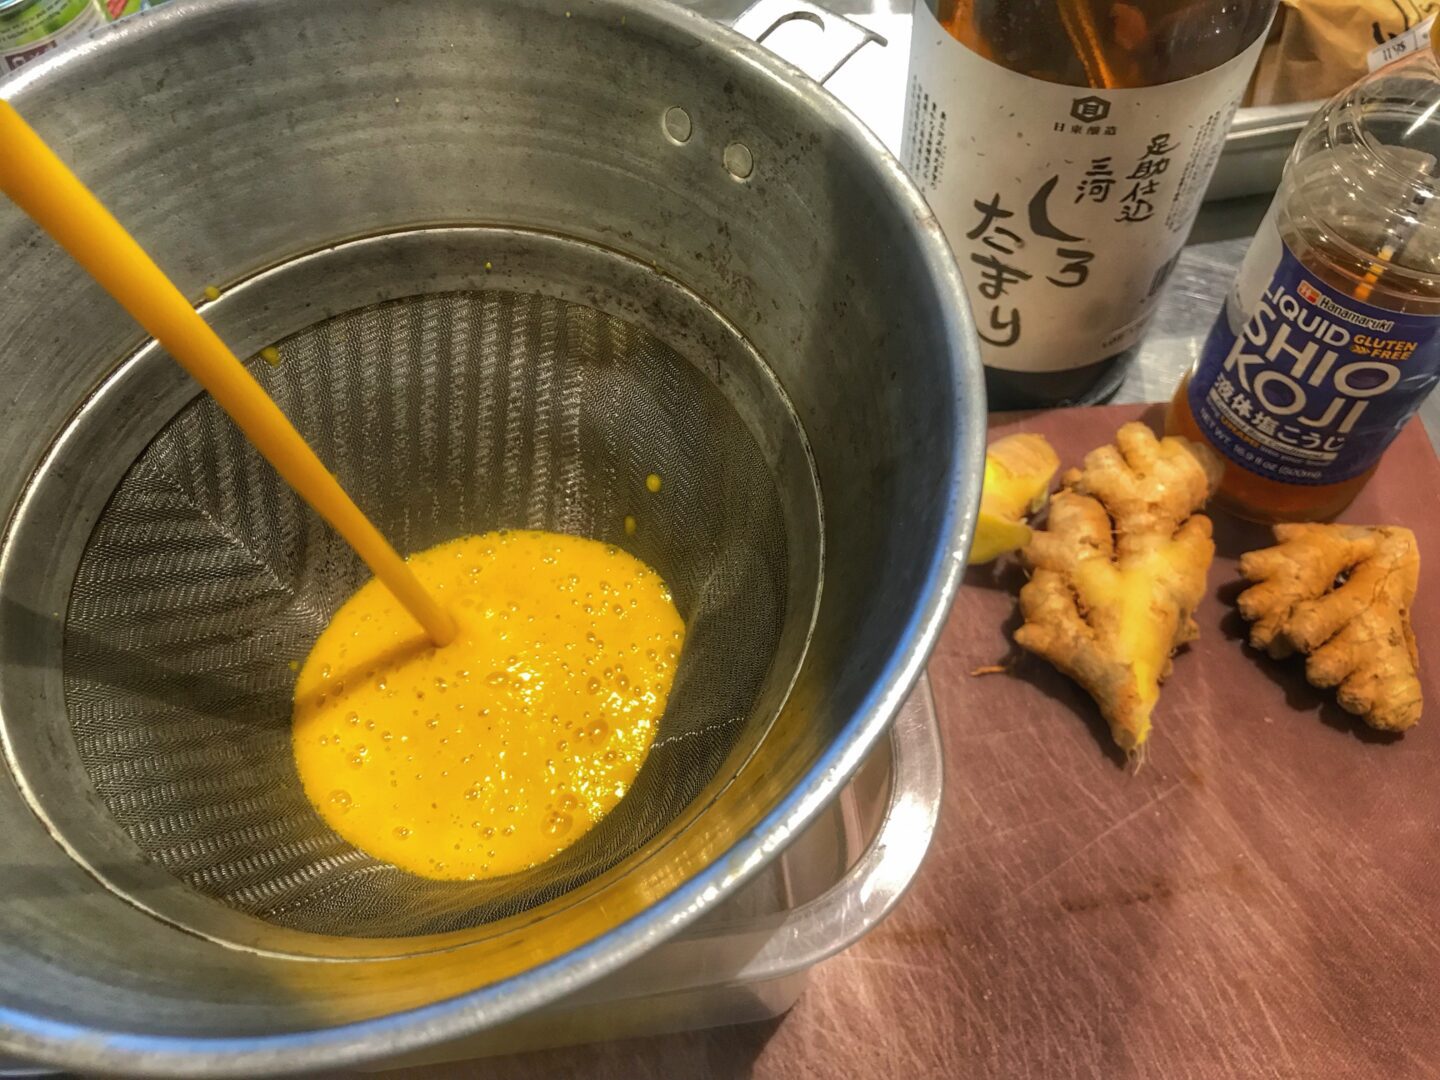 A bowl of ginger juice being poured into a container.